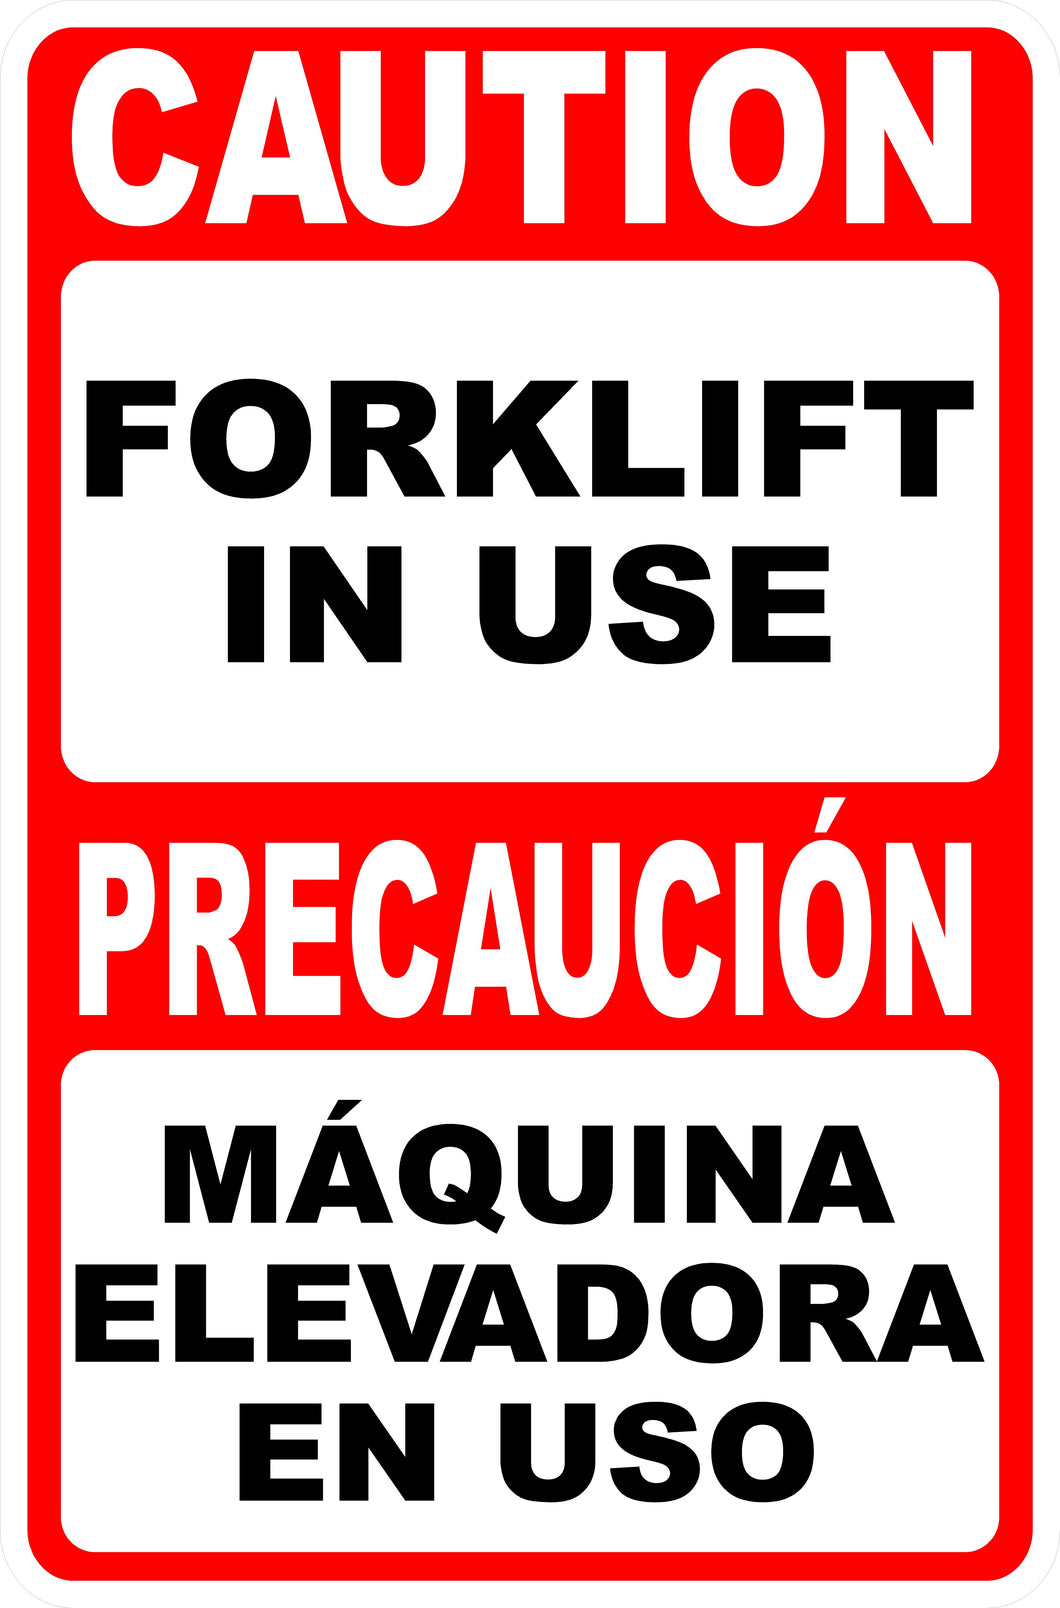 Bilingual Caution Forklift in Use Sign by Sala Graphics